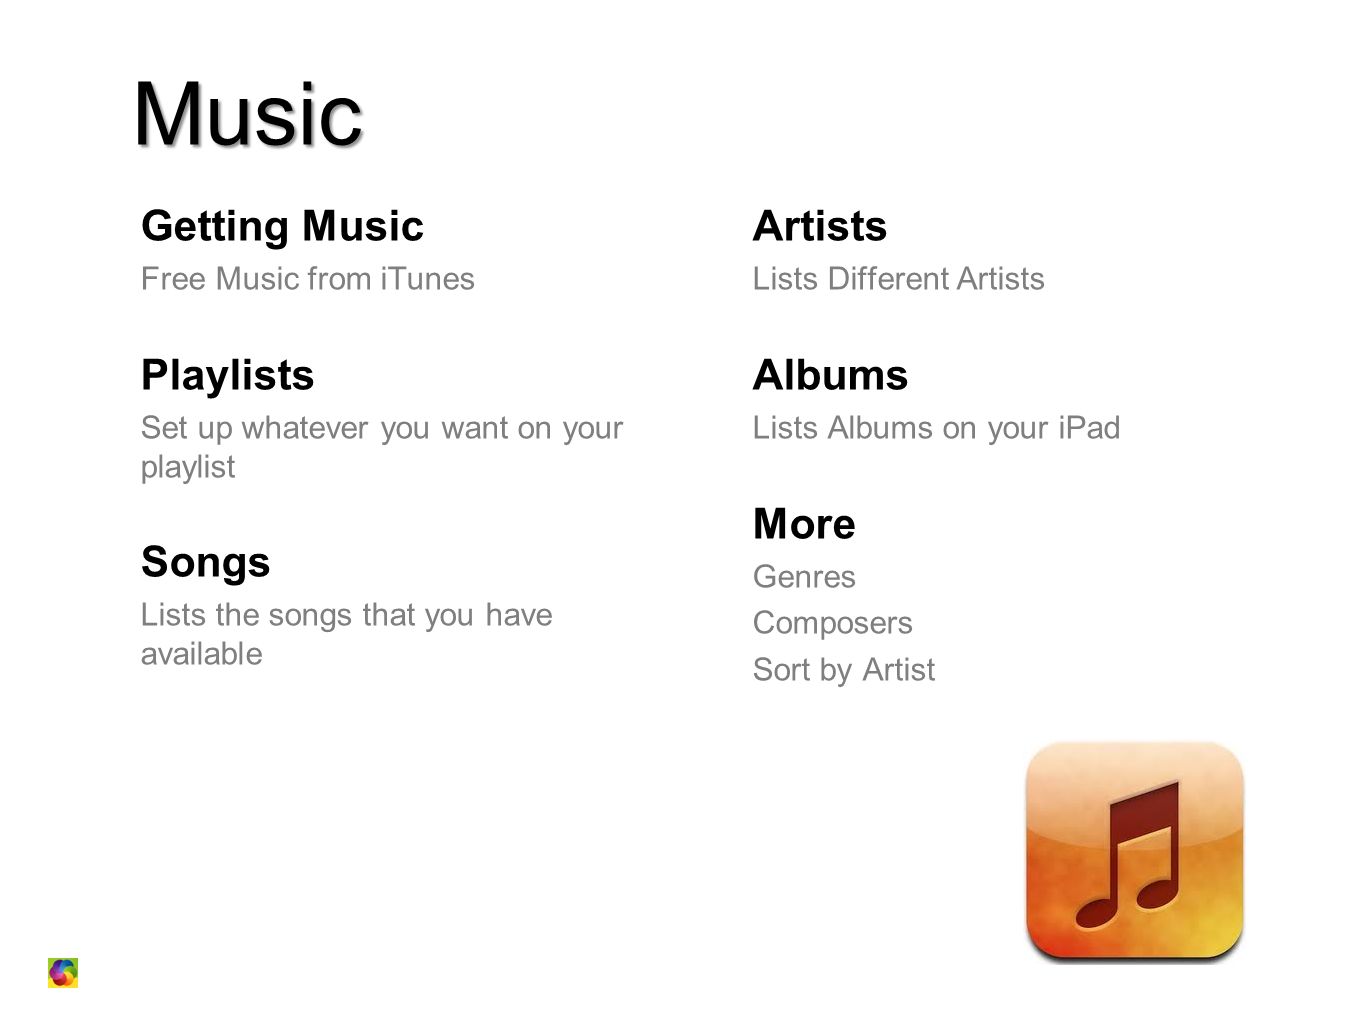 Music Getting Music Free Music from iTunes Playlists Set up whatever you want on your playlist Songs Lists the songs that you have available Artists Lists Different Artists Albums Lists Albums on your iPad More Genres Composers Sort by Artist